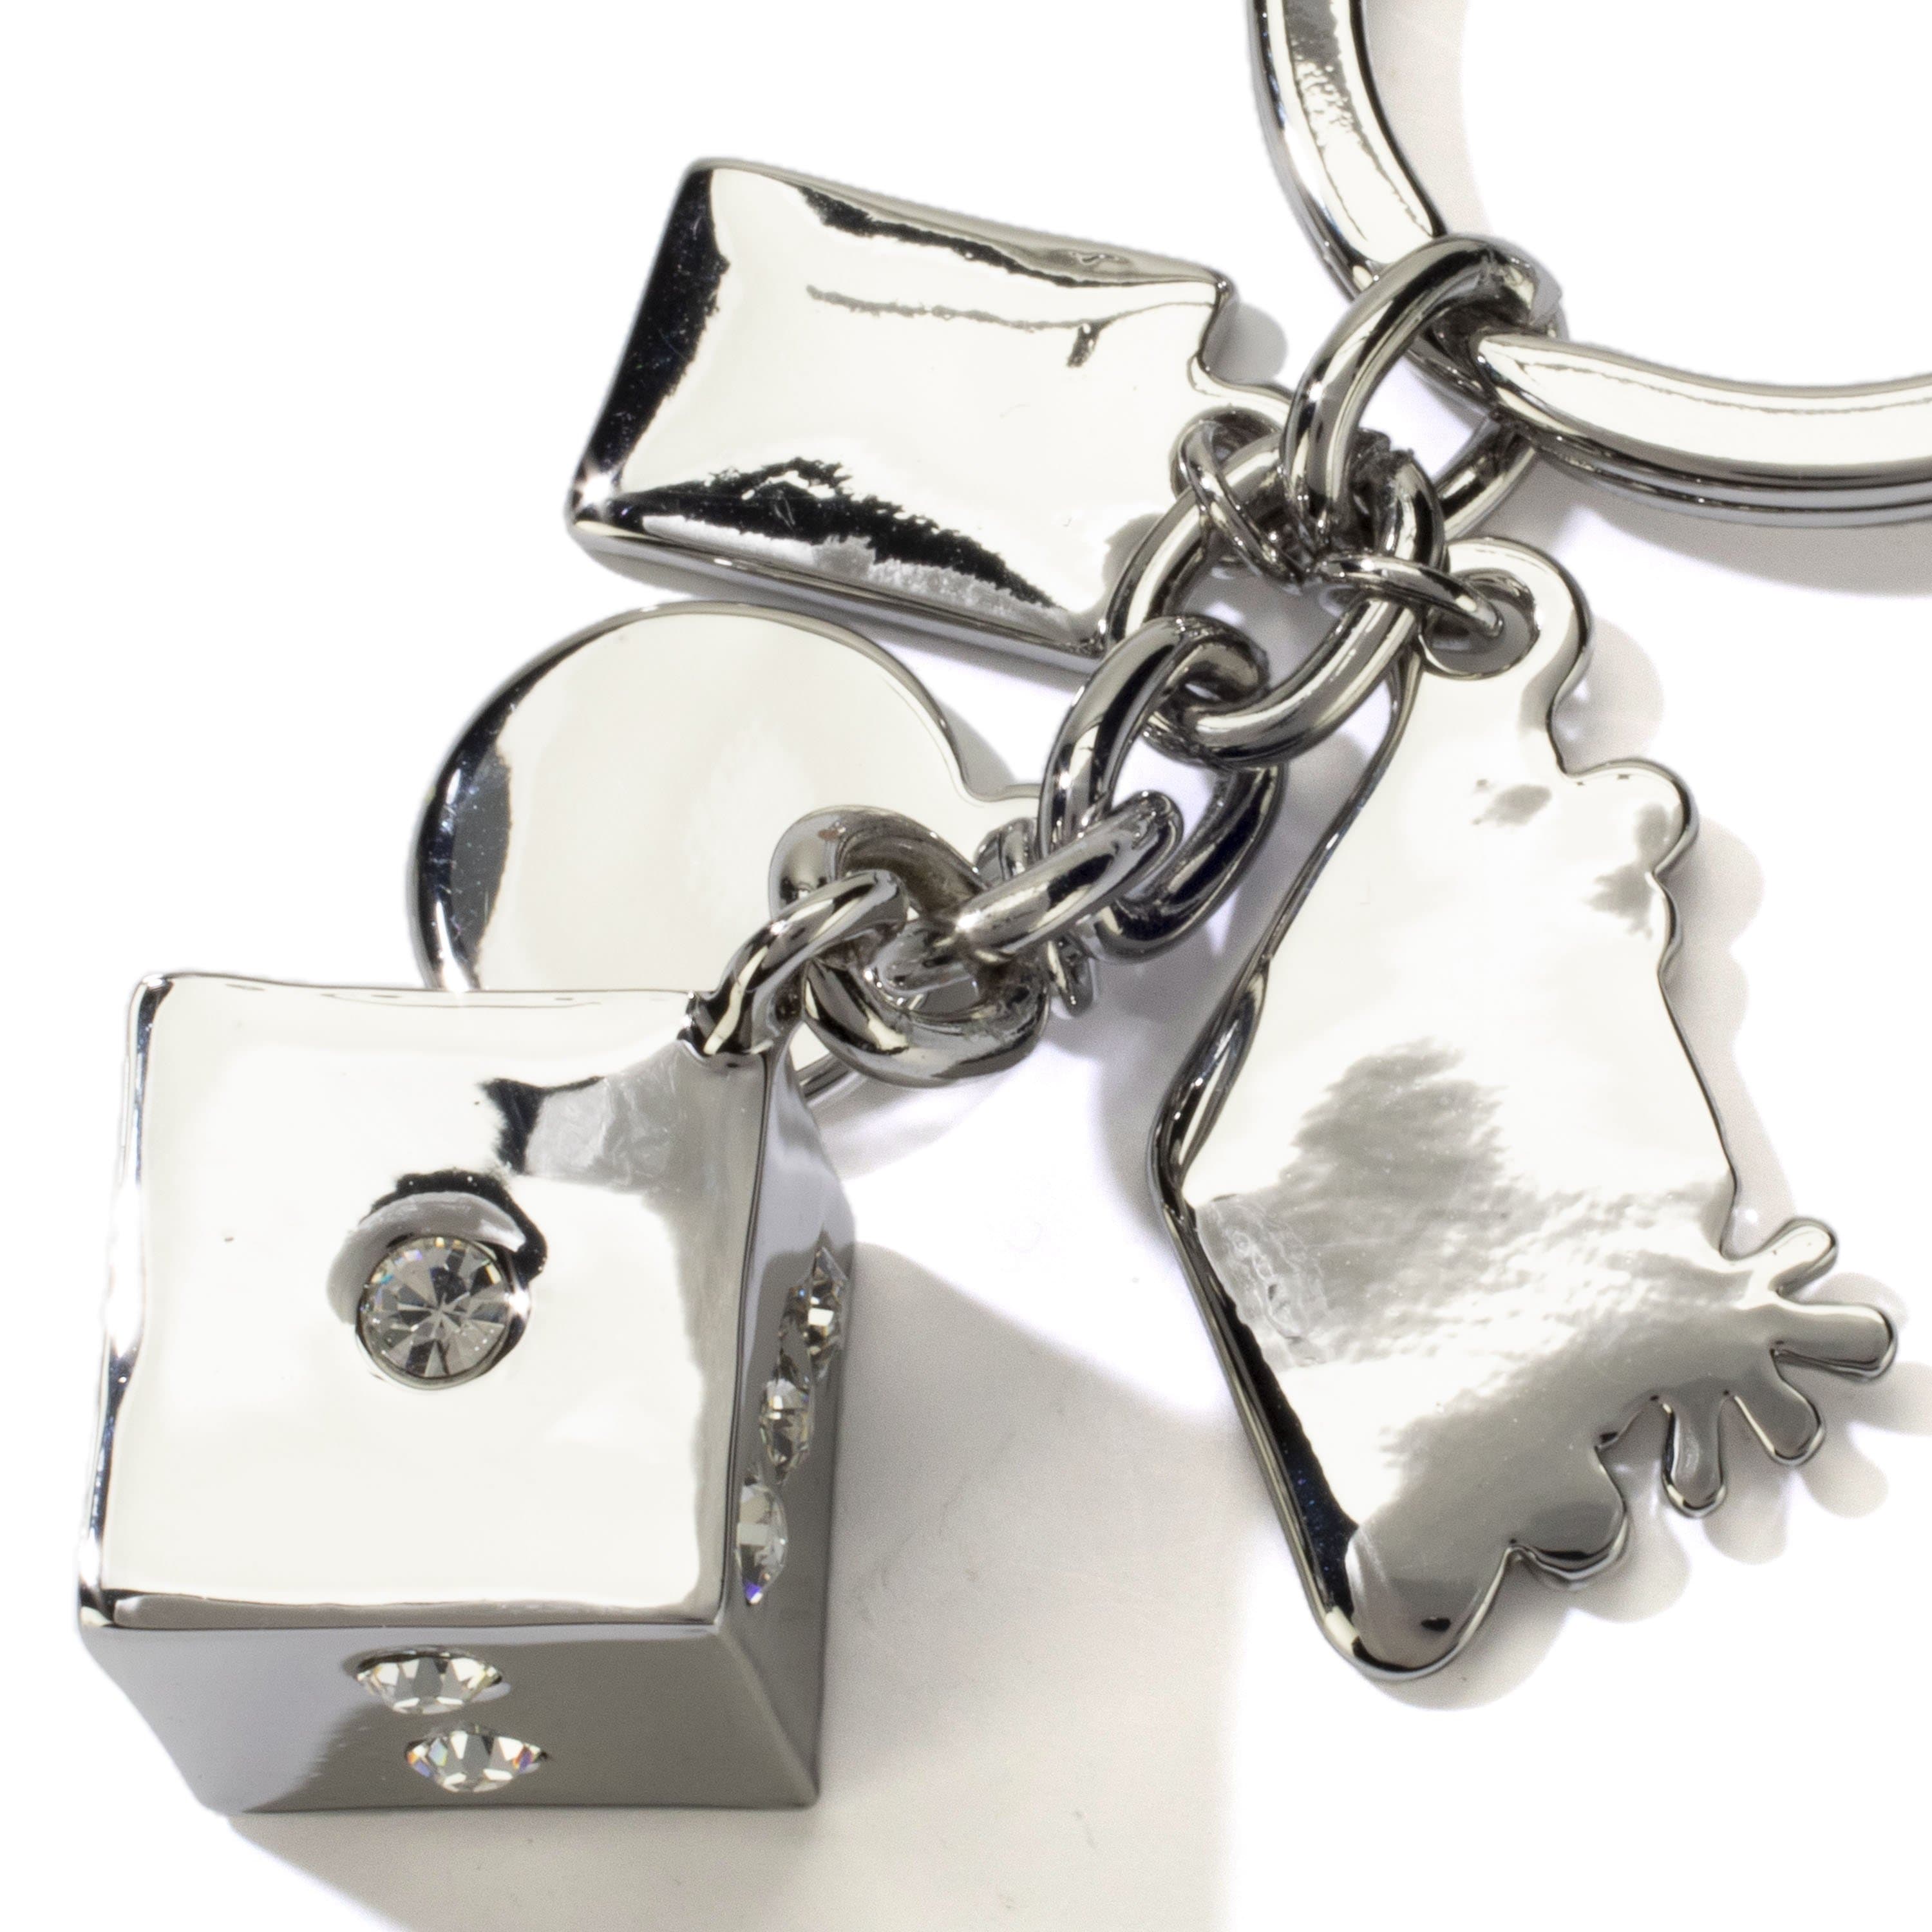 KALIFANO White LV Dice with Gold Keychain Made with Swarovski Crystals